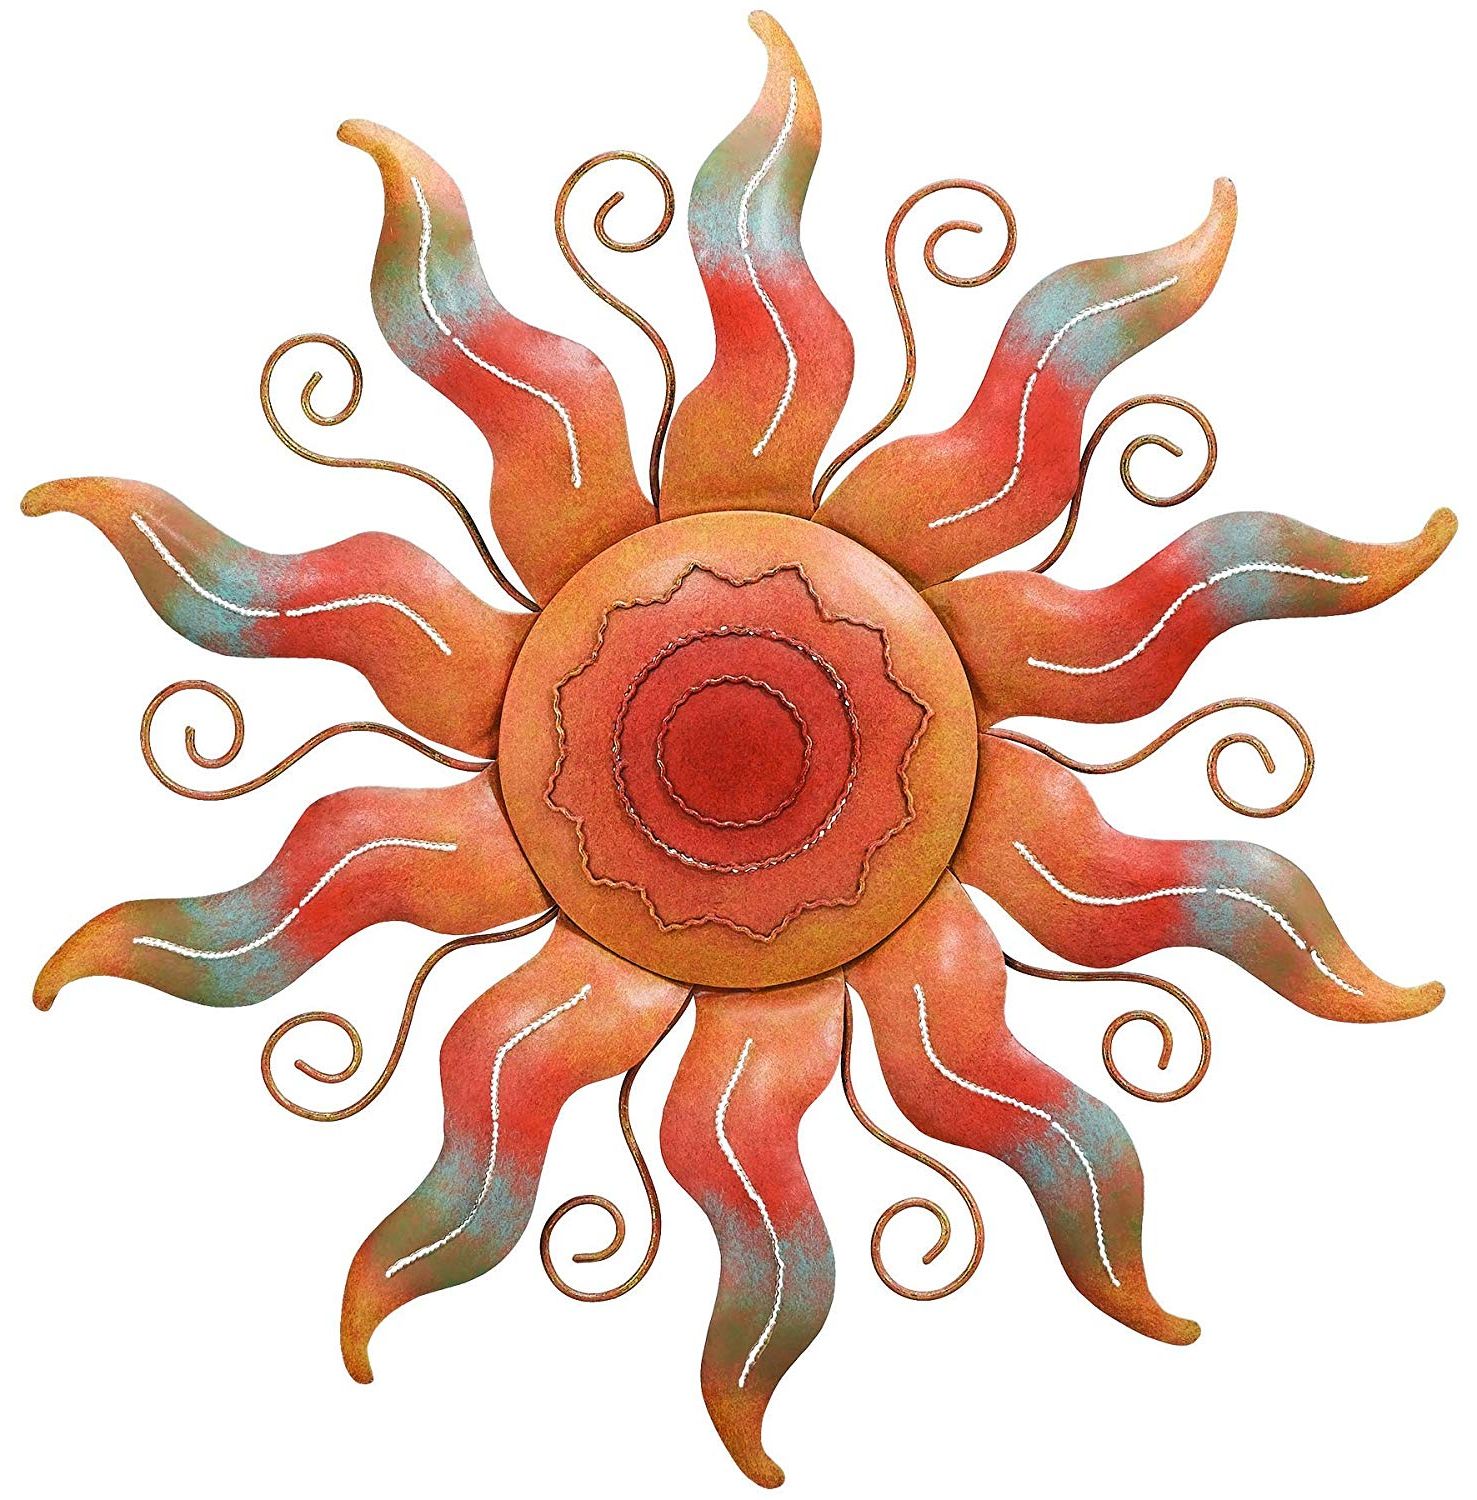 Amazon : Regal Art &gift Sun Wall Decor : Wall Sculptures For Latest Nature Metal Sun Wall Decor (View 6 of 20)